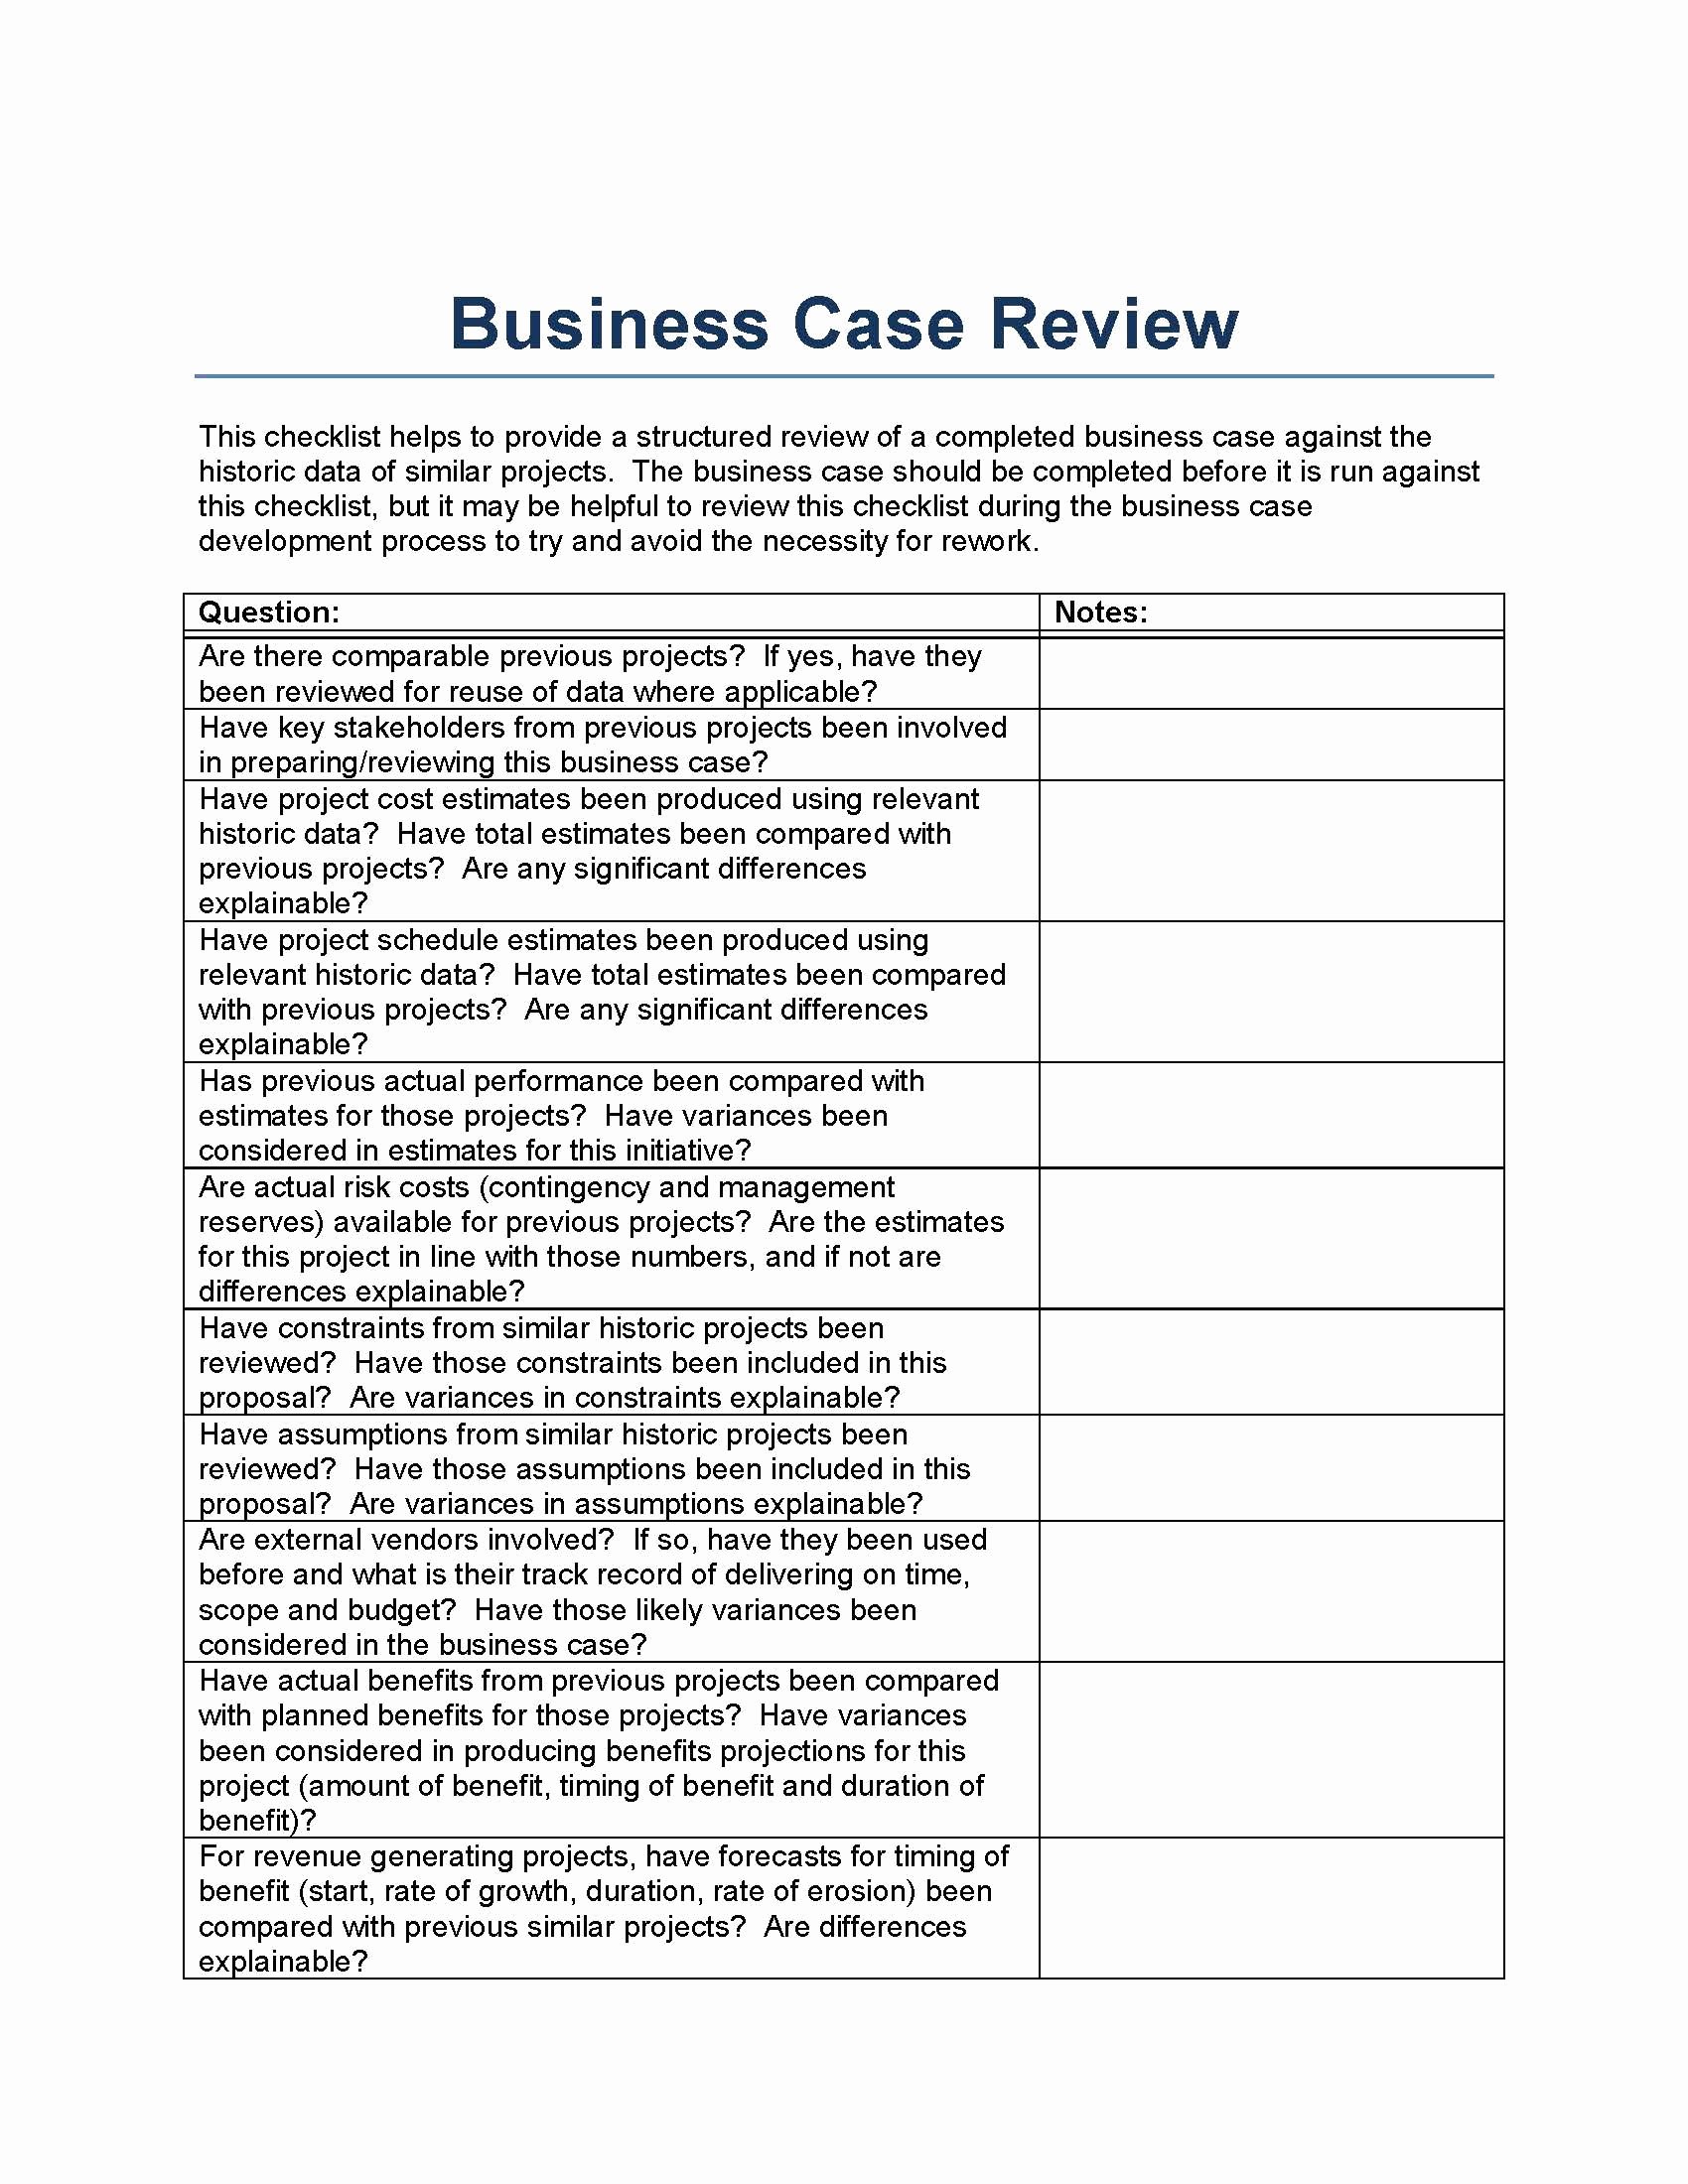 Case Review Template Inspirational Business Case Review Template From A Perspective Of